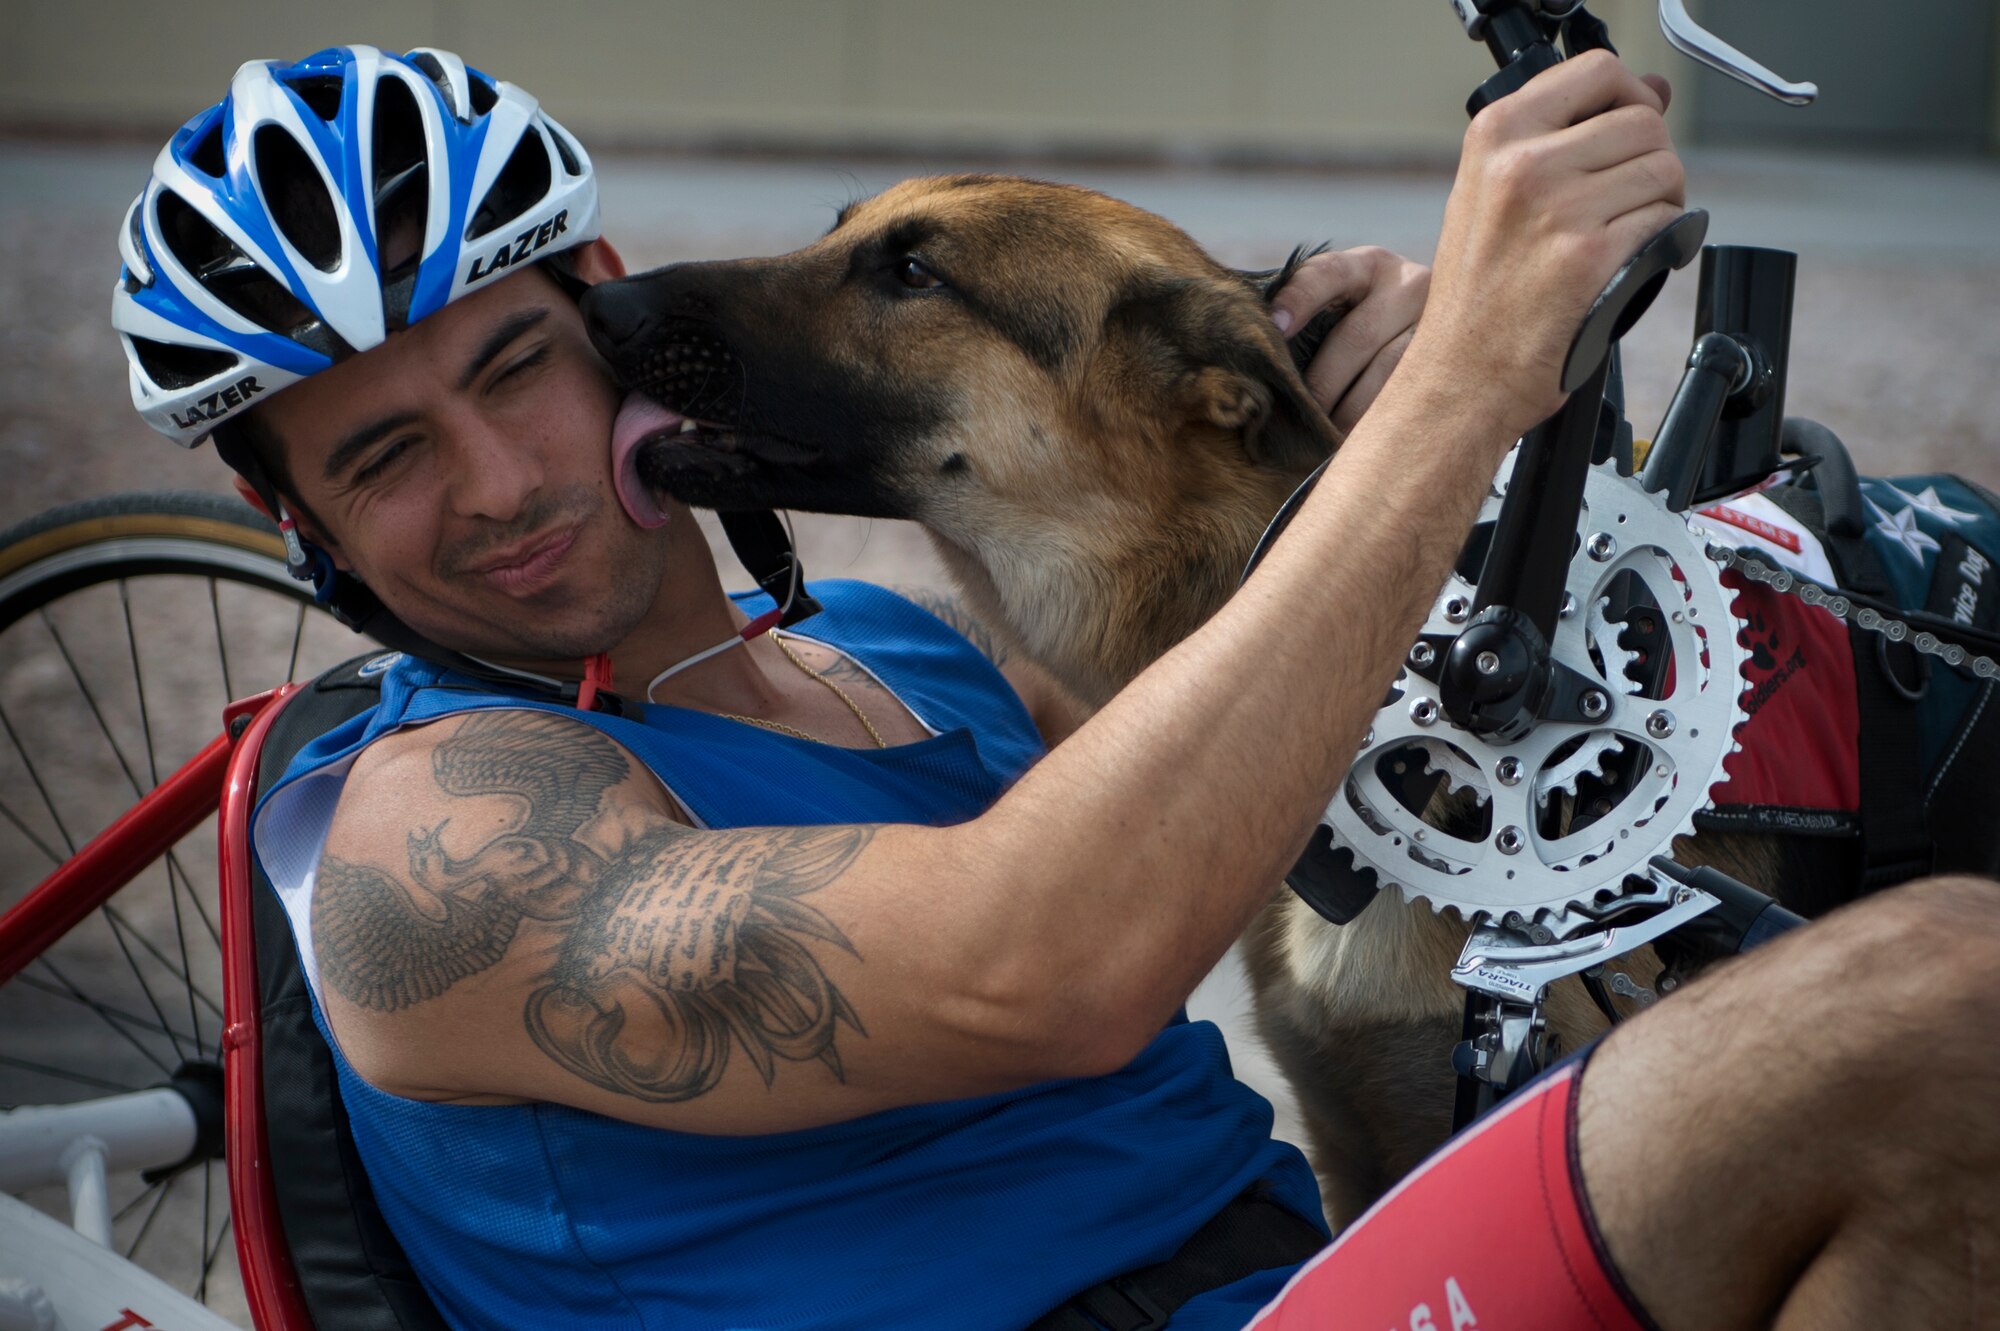 August O’Neill is kissed by his service dog, Kai, April 9, 2014, during the cycling portion of the Air Force Trials at Nellis Air Force Base, Nev.  O’Neill, an Air Force wounded warrior, competed in the 6-mile men’s handcycle heat with four others.  (U.S. Air Force photo/Senior Airman Jette Carr)  